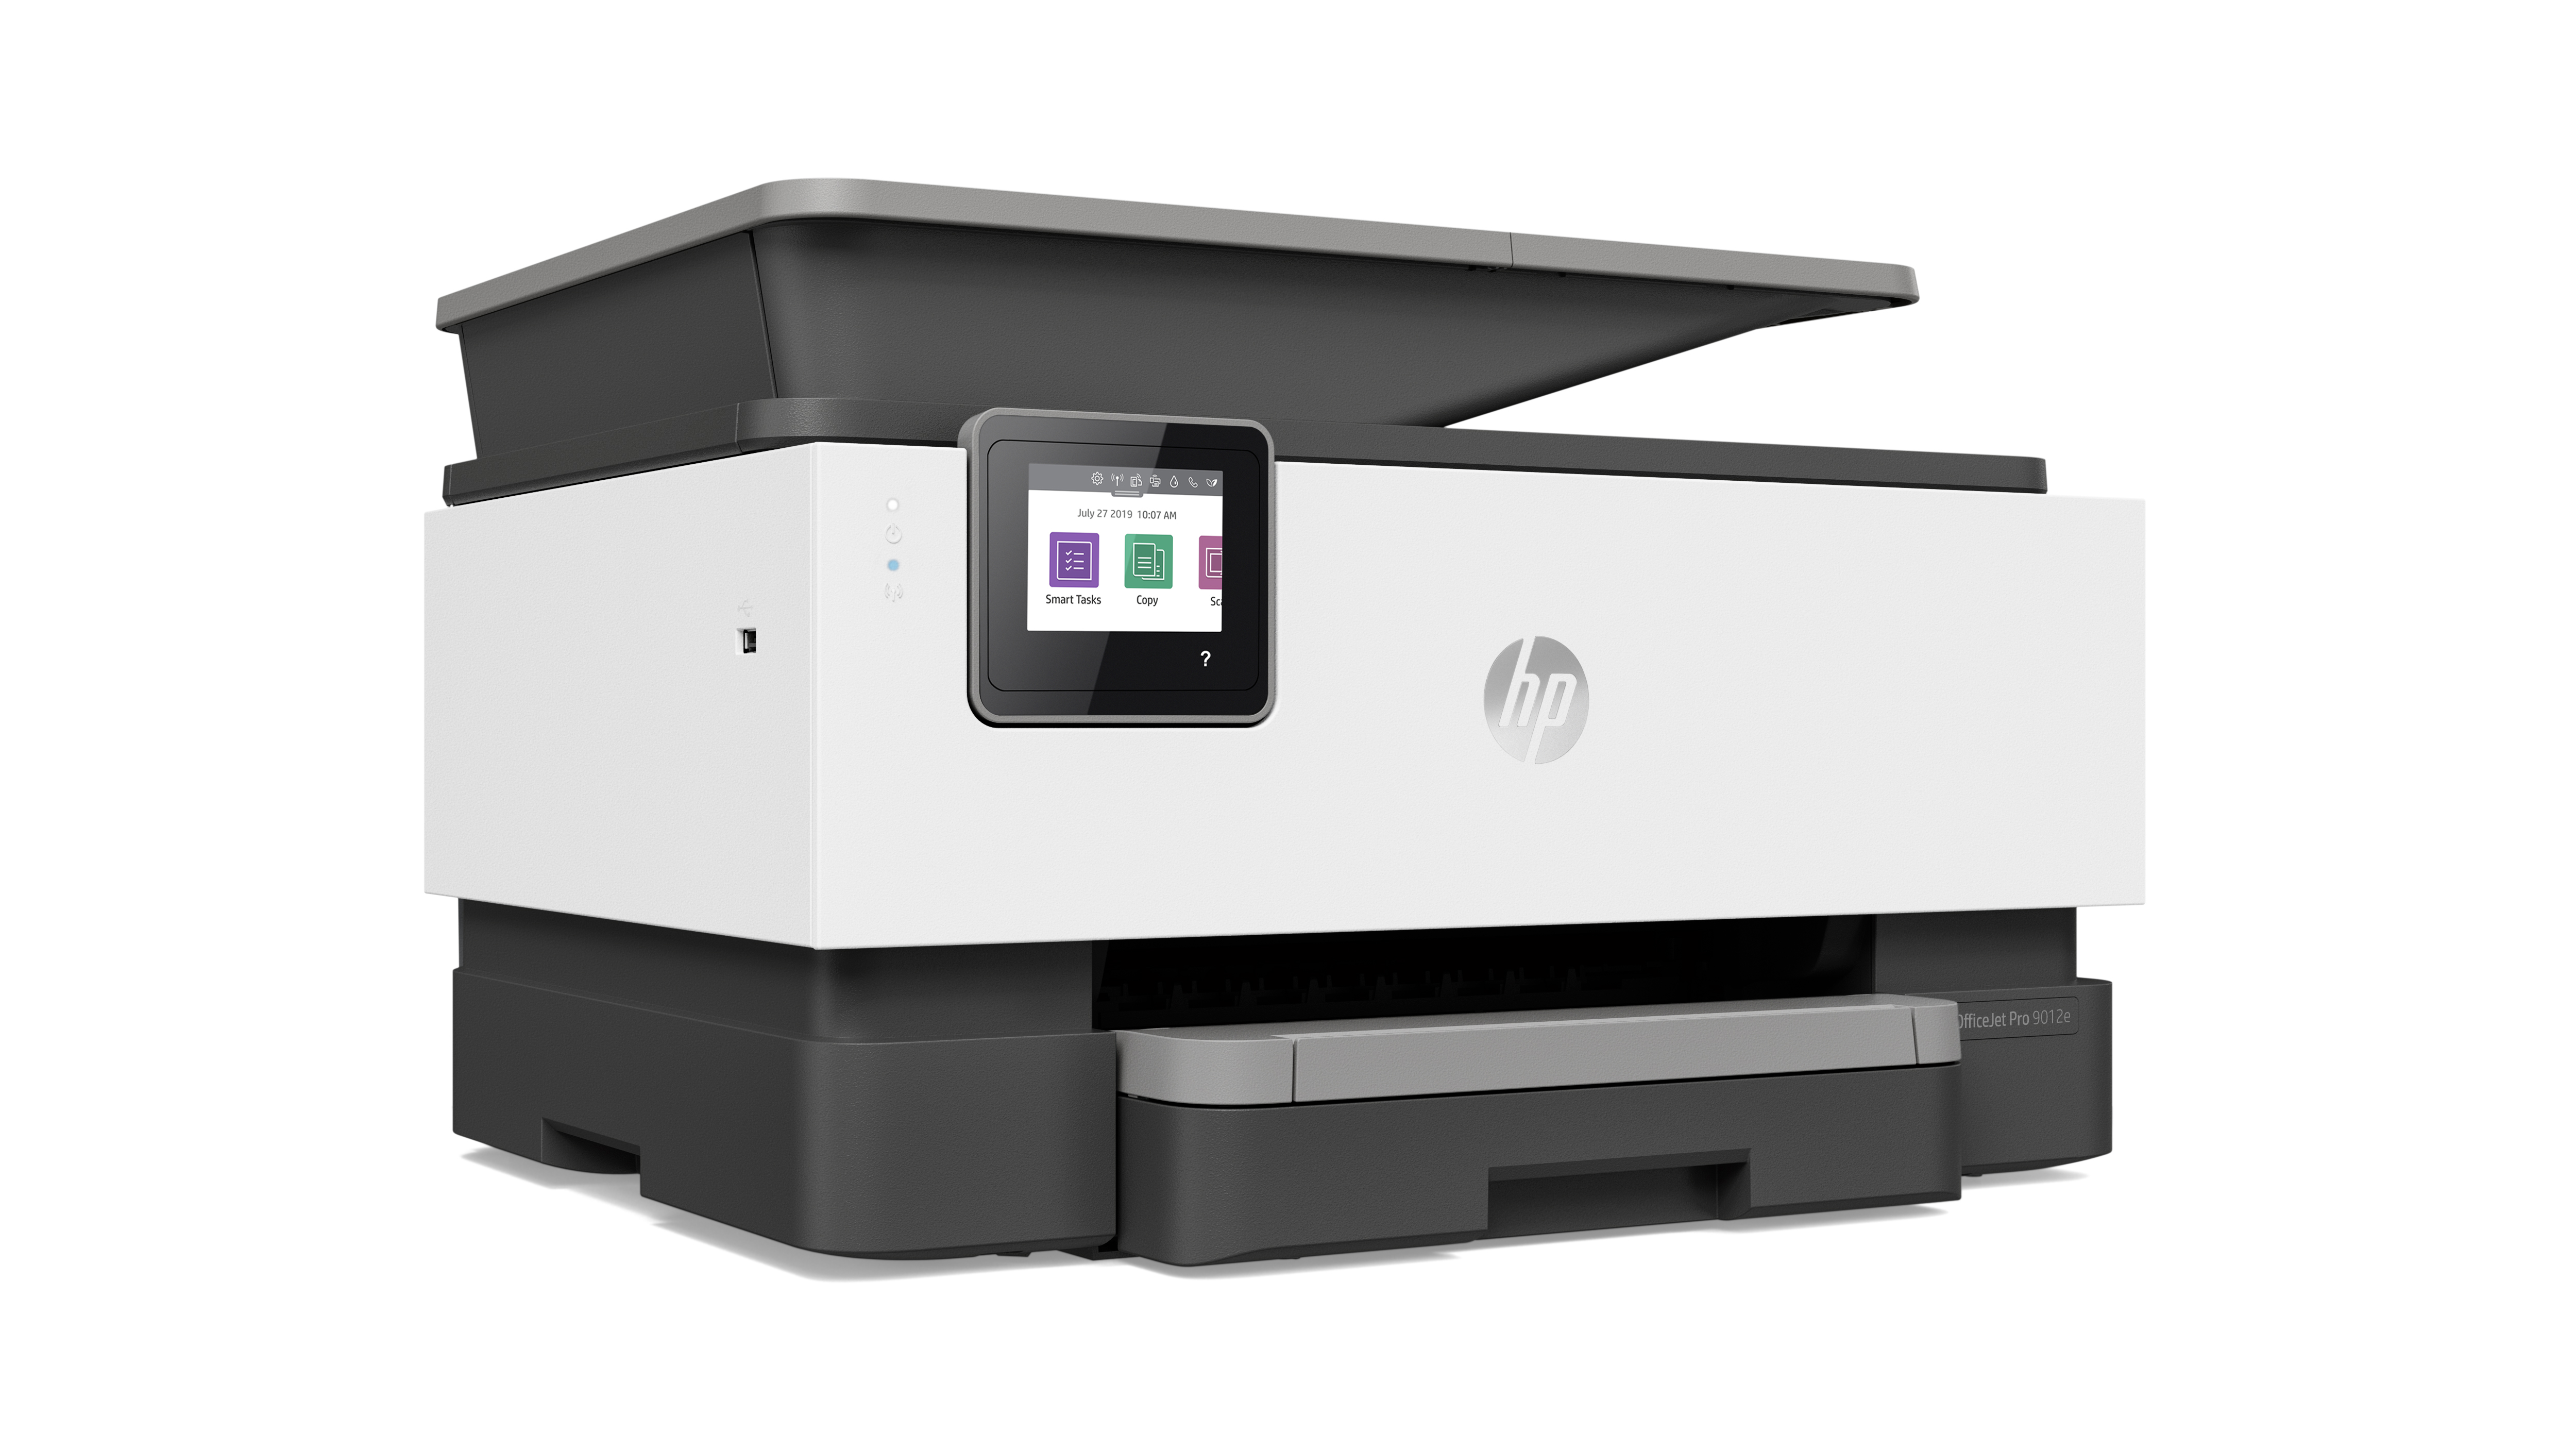 HP OfficeJet Pro 9012e review: Jack of all trades